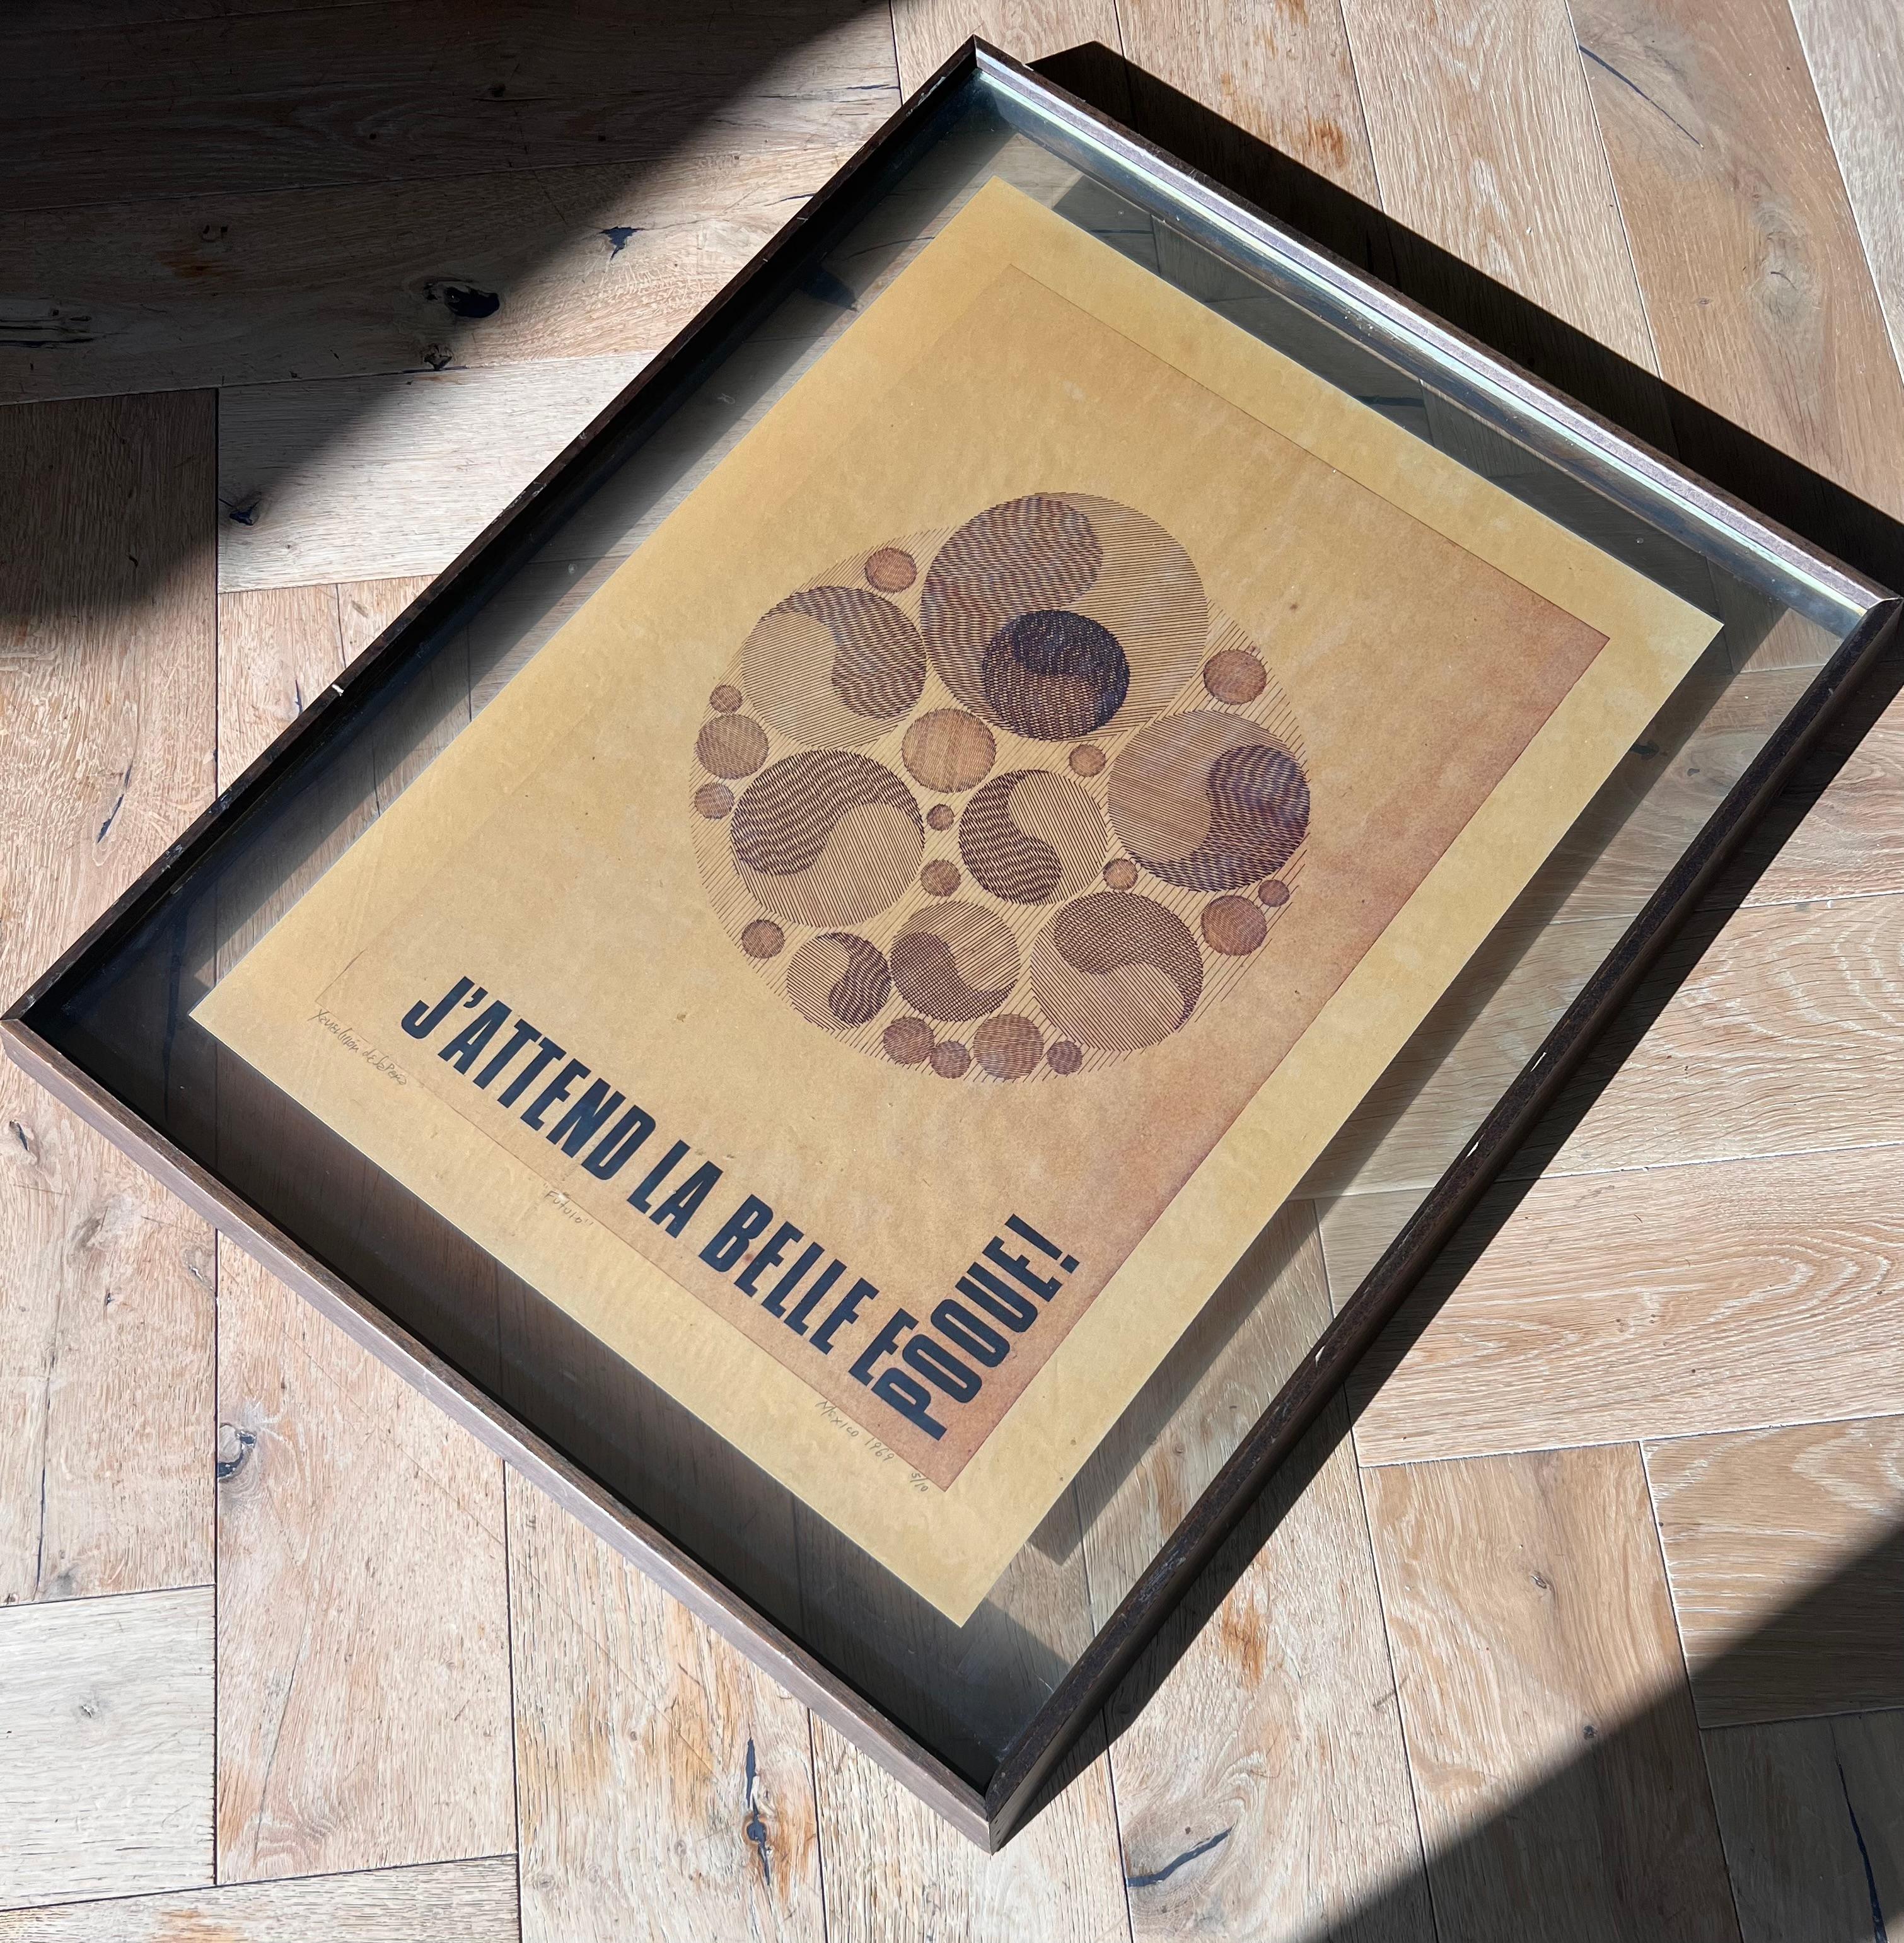 J’ATTEND LA BELLE ÉPOQUE: a vintage print, “Futura”, signed, Mexico 1969. Edition 5/10 and framed in glass and wood. J’attend la belle époque translates loosely to «waiting for the good old days»; I daresay perhaps a rather relevant sentiment. Pick